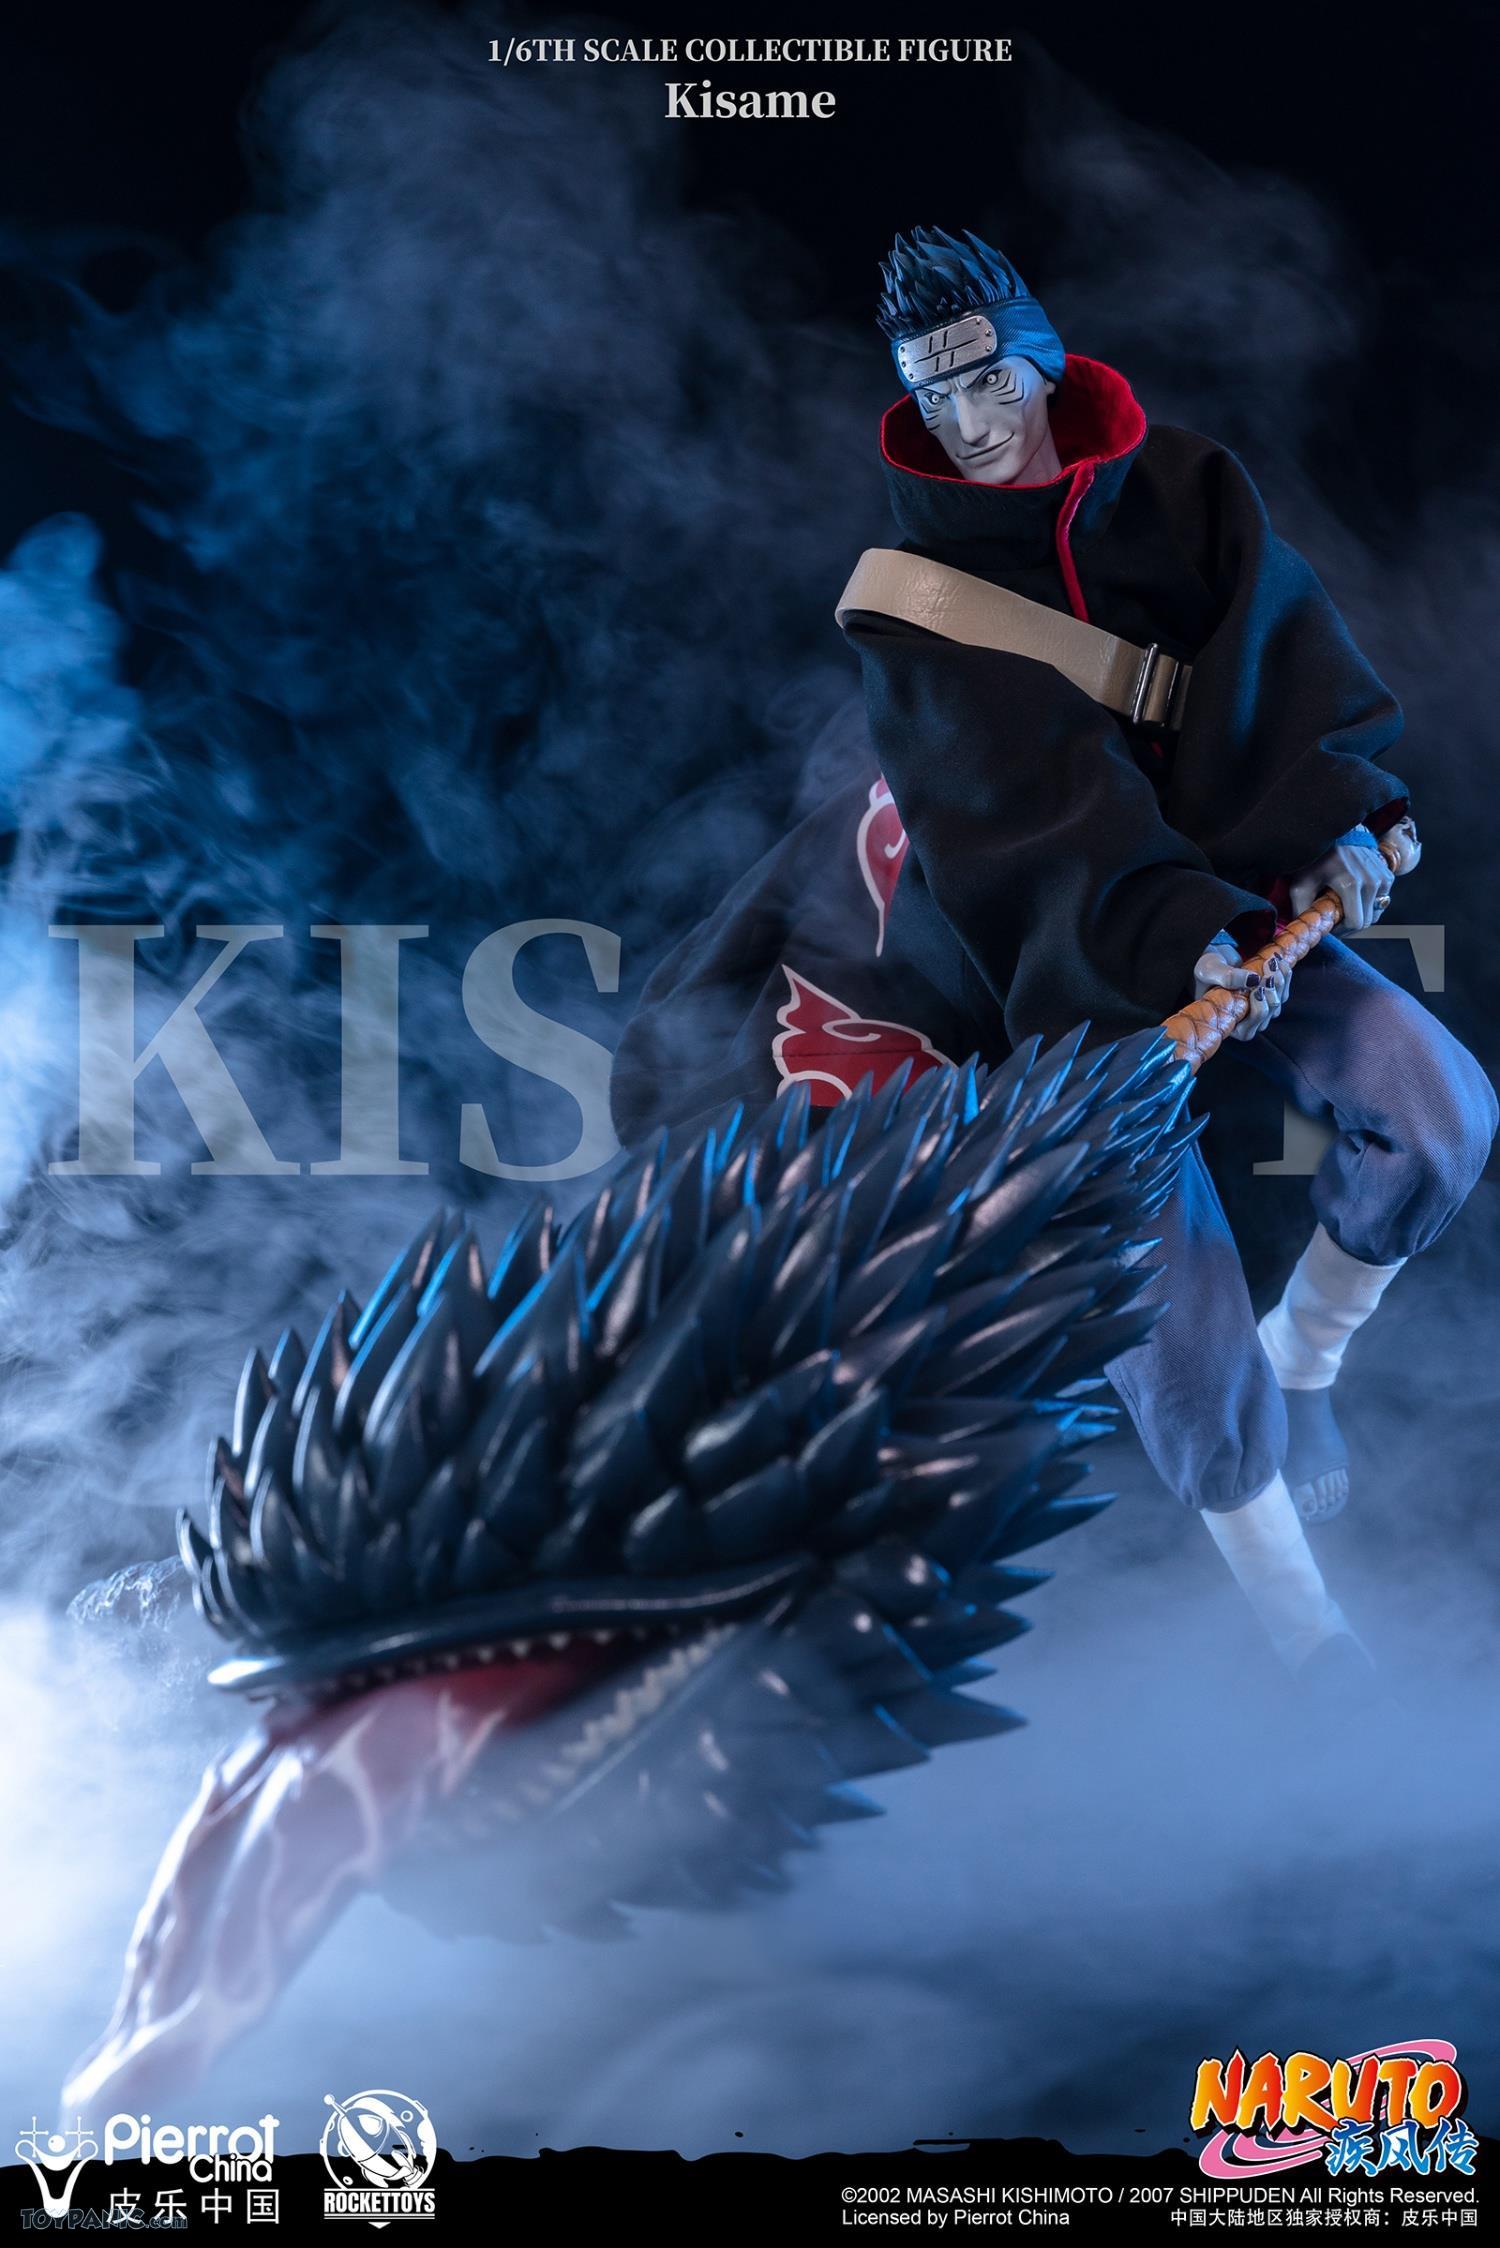 RocketToys - NEW PRODUCT: Rocket Toys ROC-007 1/6 Scale Kisame 221202460435PM_1782184